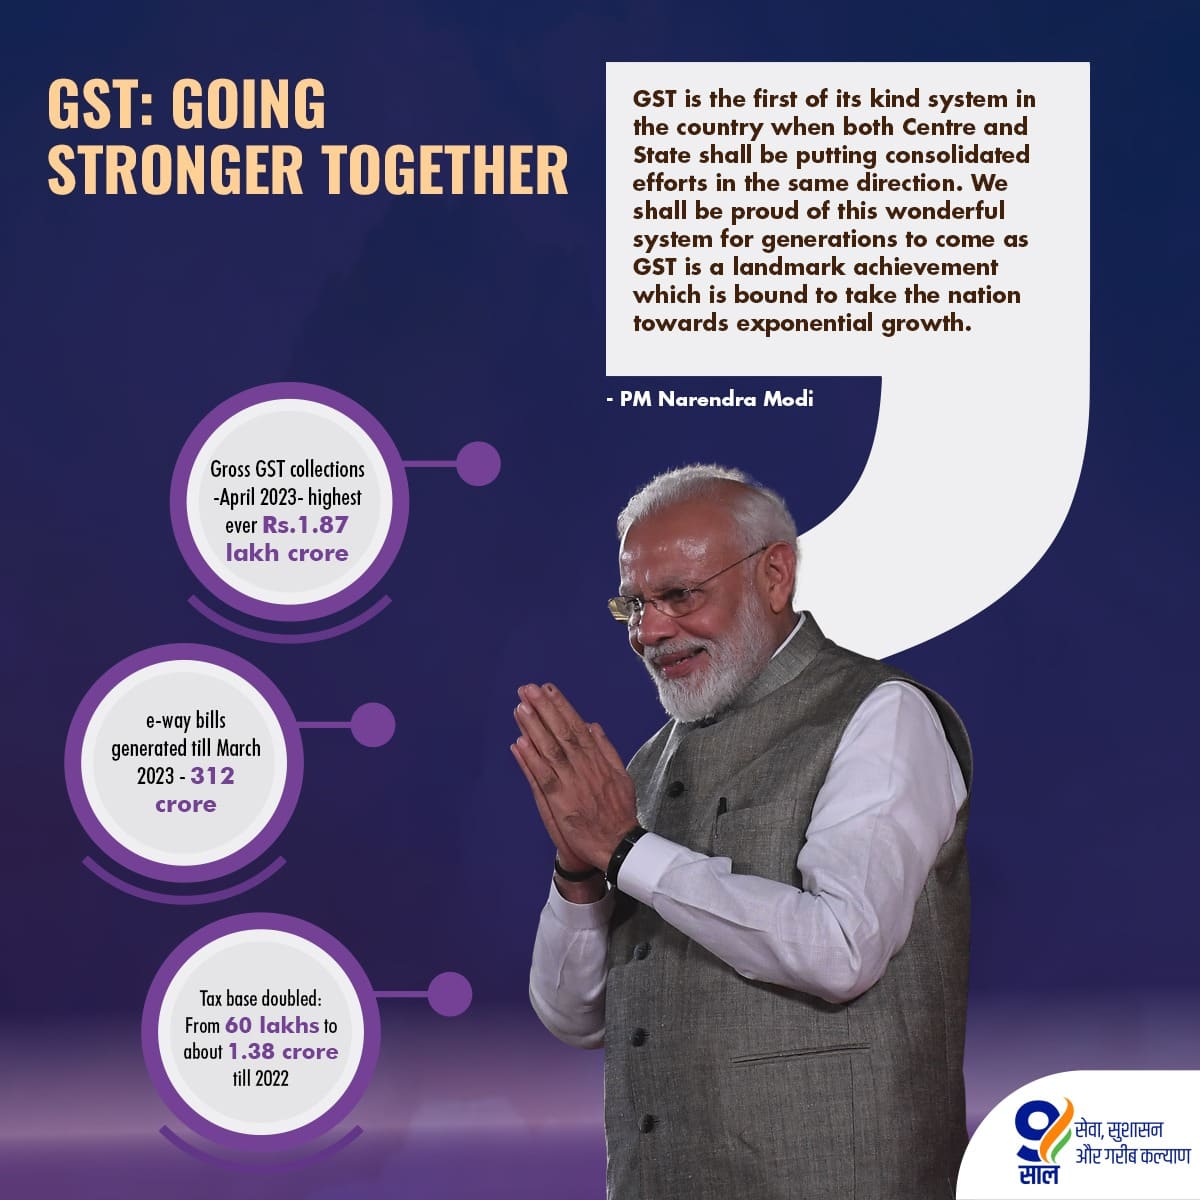 The first step to reforms begins by simplification of complex processes. 
By bringing in GST to replace a complicated web of taxes and cesses, govt under the leadership of PM Shri @narendramodi ji has taken a major step in the right direction.

#9YearsOfEconomicReforms